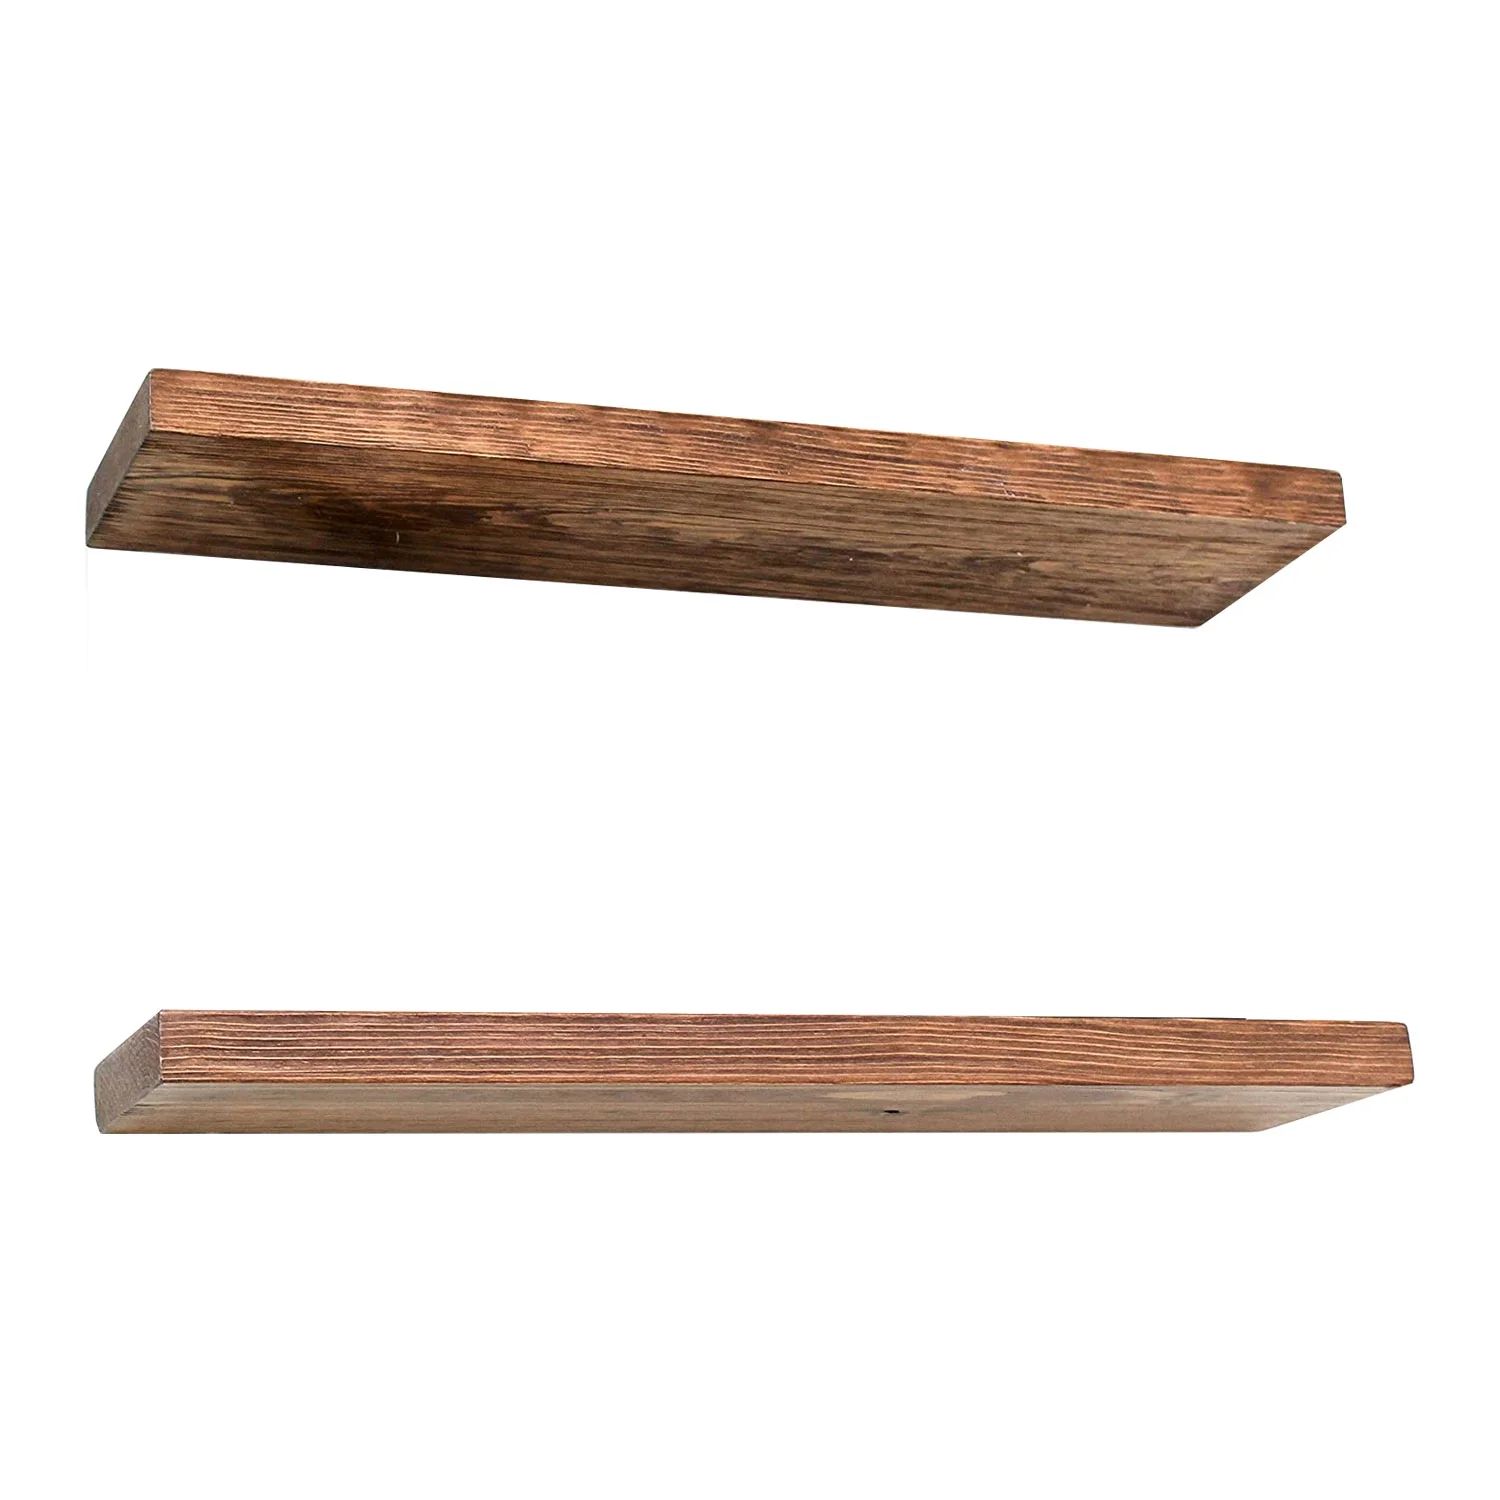 Willow & Grace Connie 24 Inch Floating Shelves, Light Walnut, Set of 2 | Walmart (US)